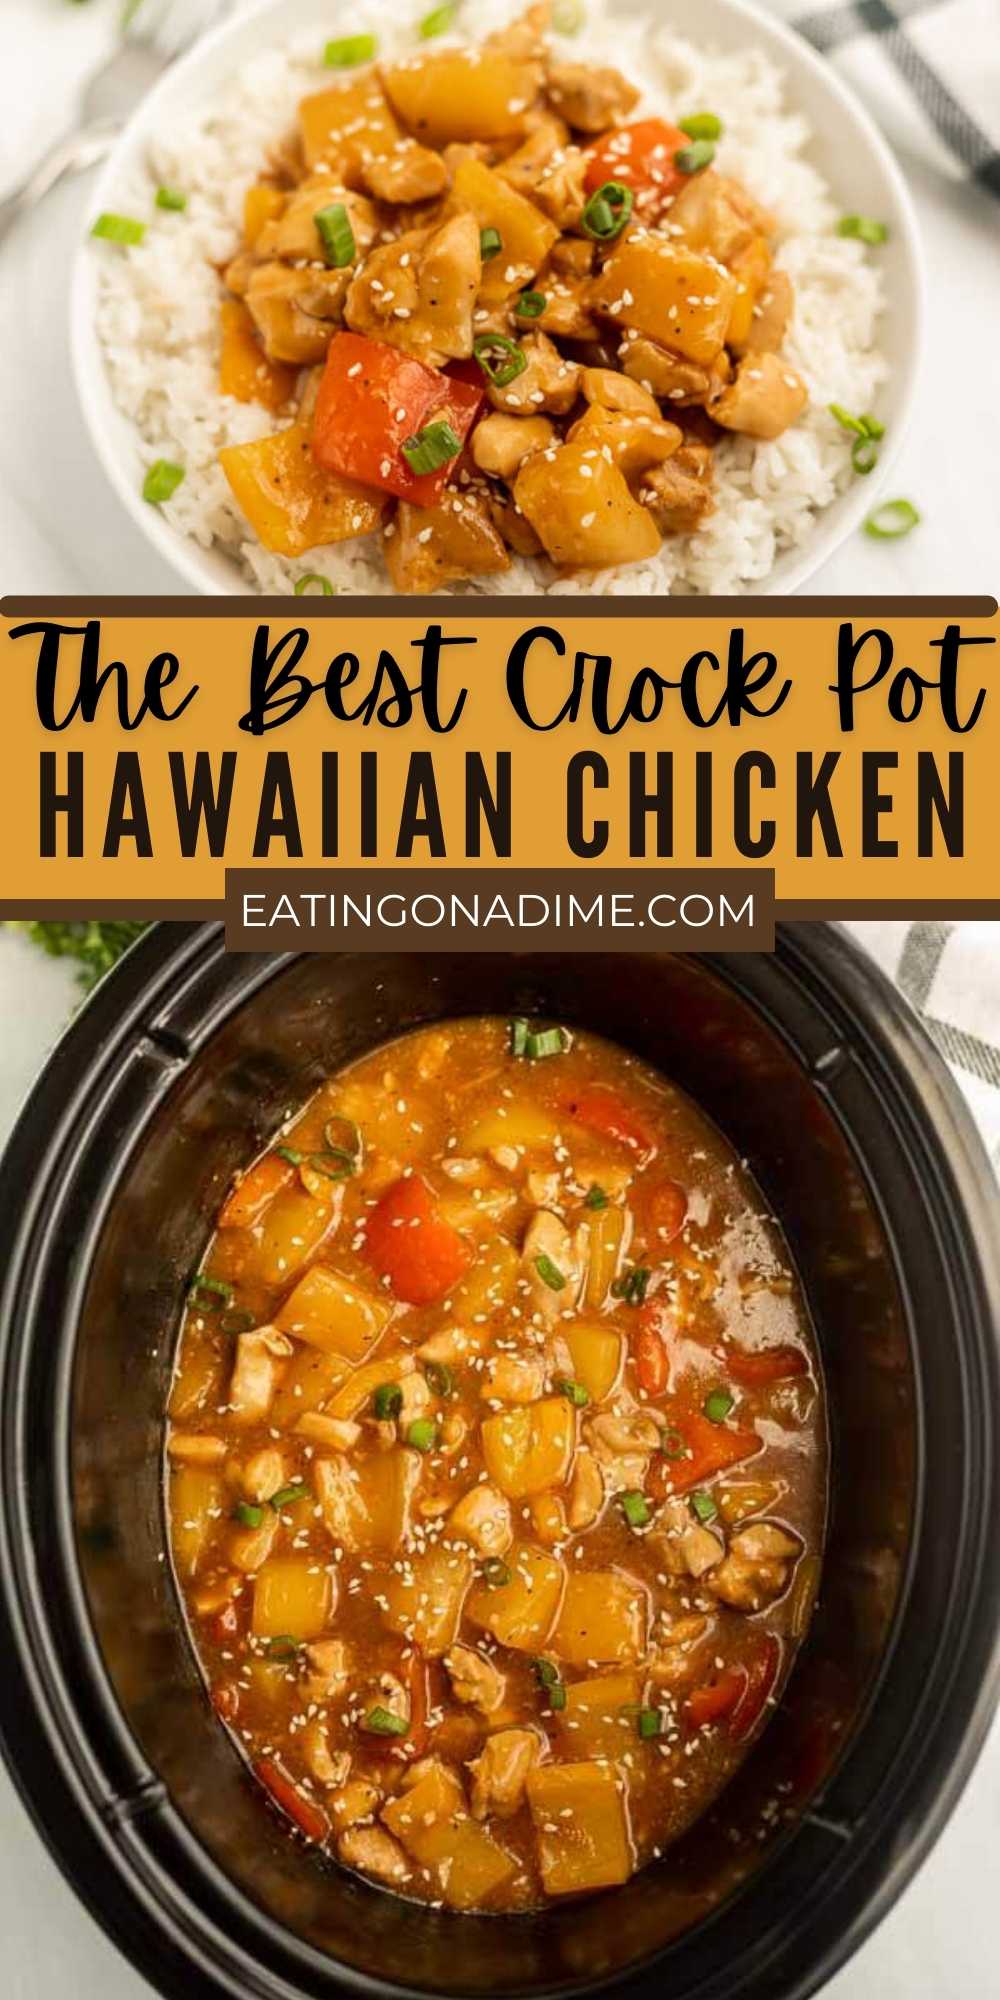 Crock Pot Hawaiian Chicken Recipe is made with chicken thighs and easy flavorful ingredients. Easy prep results in a delicious crock pot meal. This Slow Cooker Hawaiian Chicken is one of my favorite easy crock pot recipes! #eatingonadime #crockpotrecipes #slowcookerrecipes #chickenrecipes 